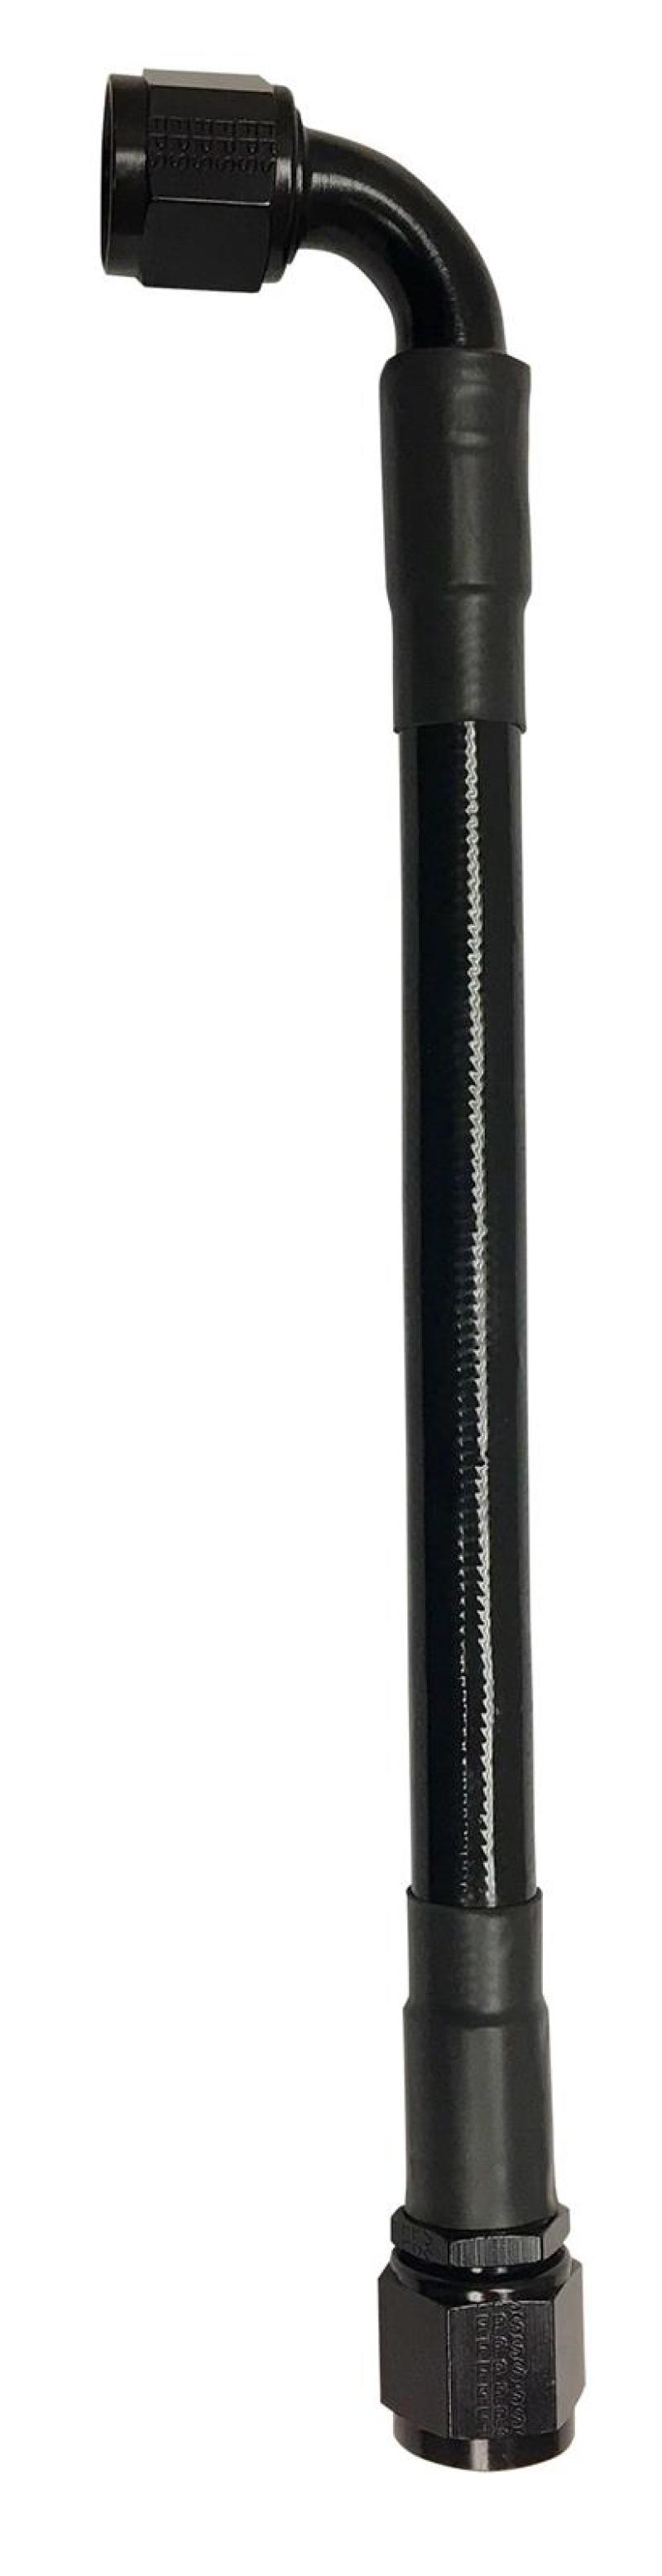 Fragola -8AN Ext Black PTFE Hose Assembly Straight x 90 Degree 20in - 6028-1-2-20BL